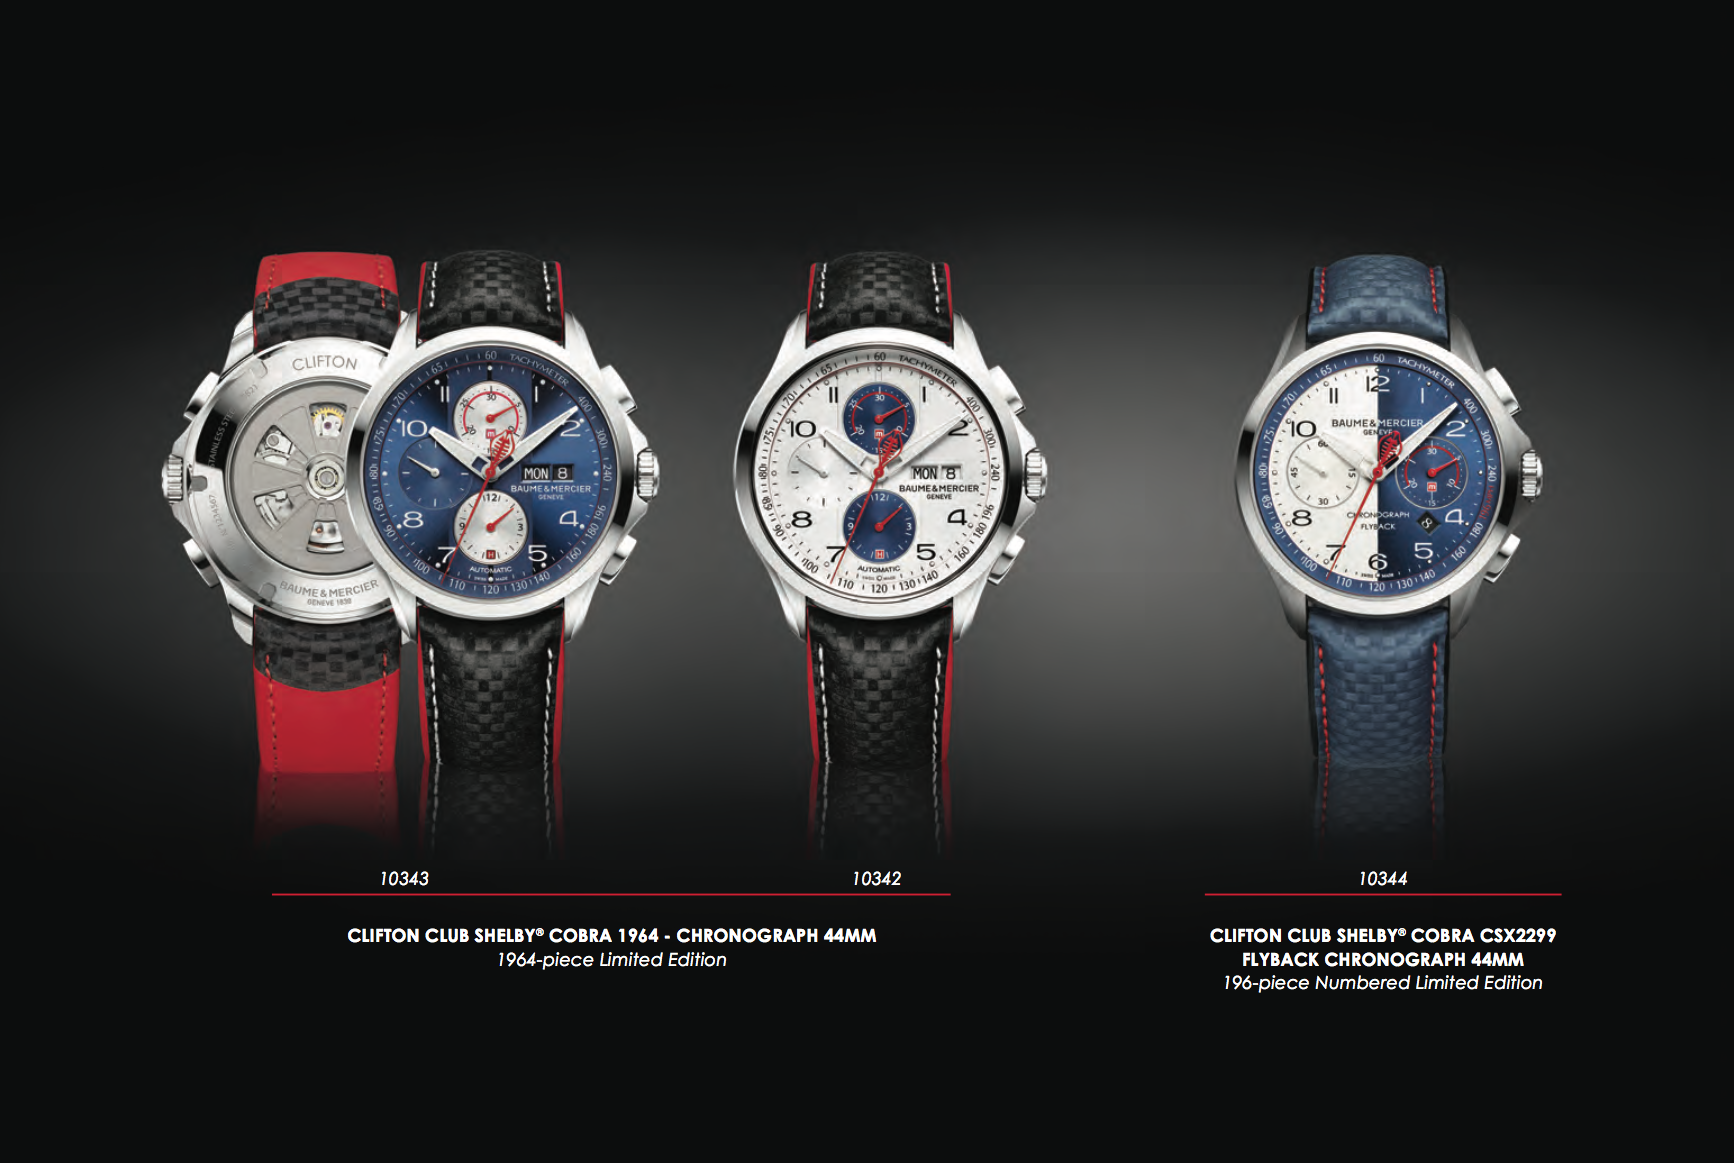 Baume & Mercier Clifton Club Shelby Cobra - the three limited editions at a glance